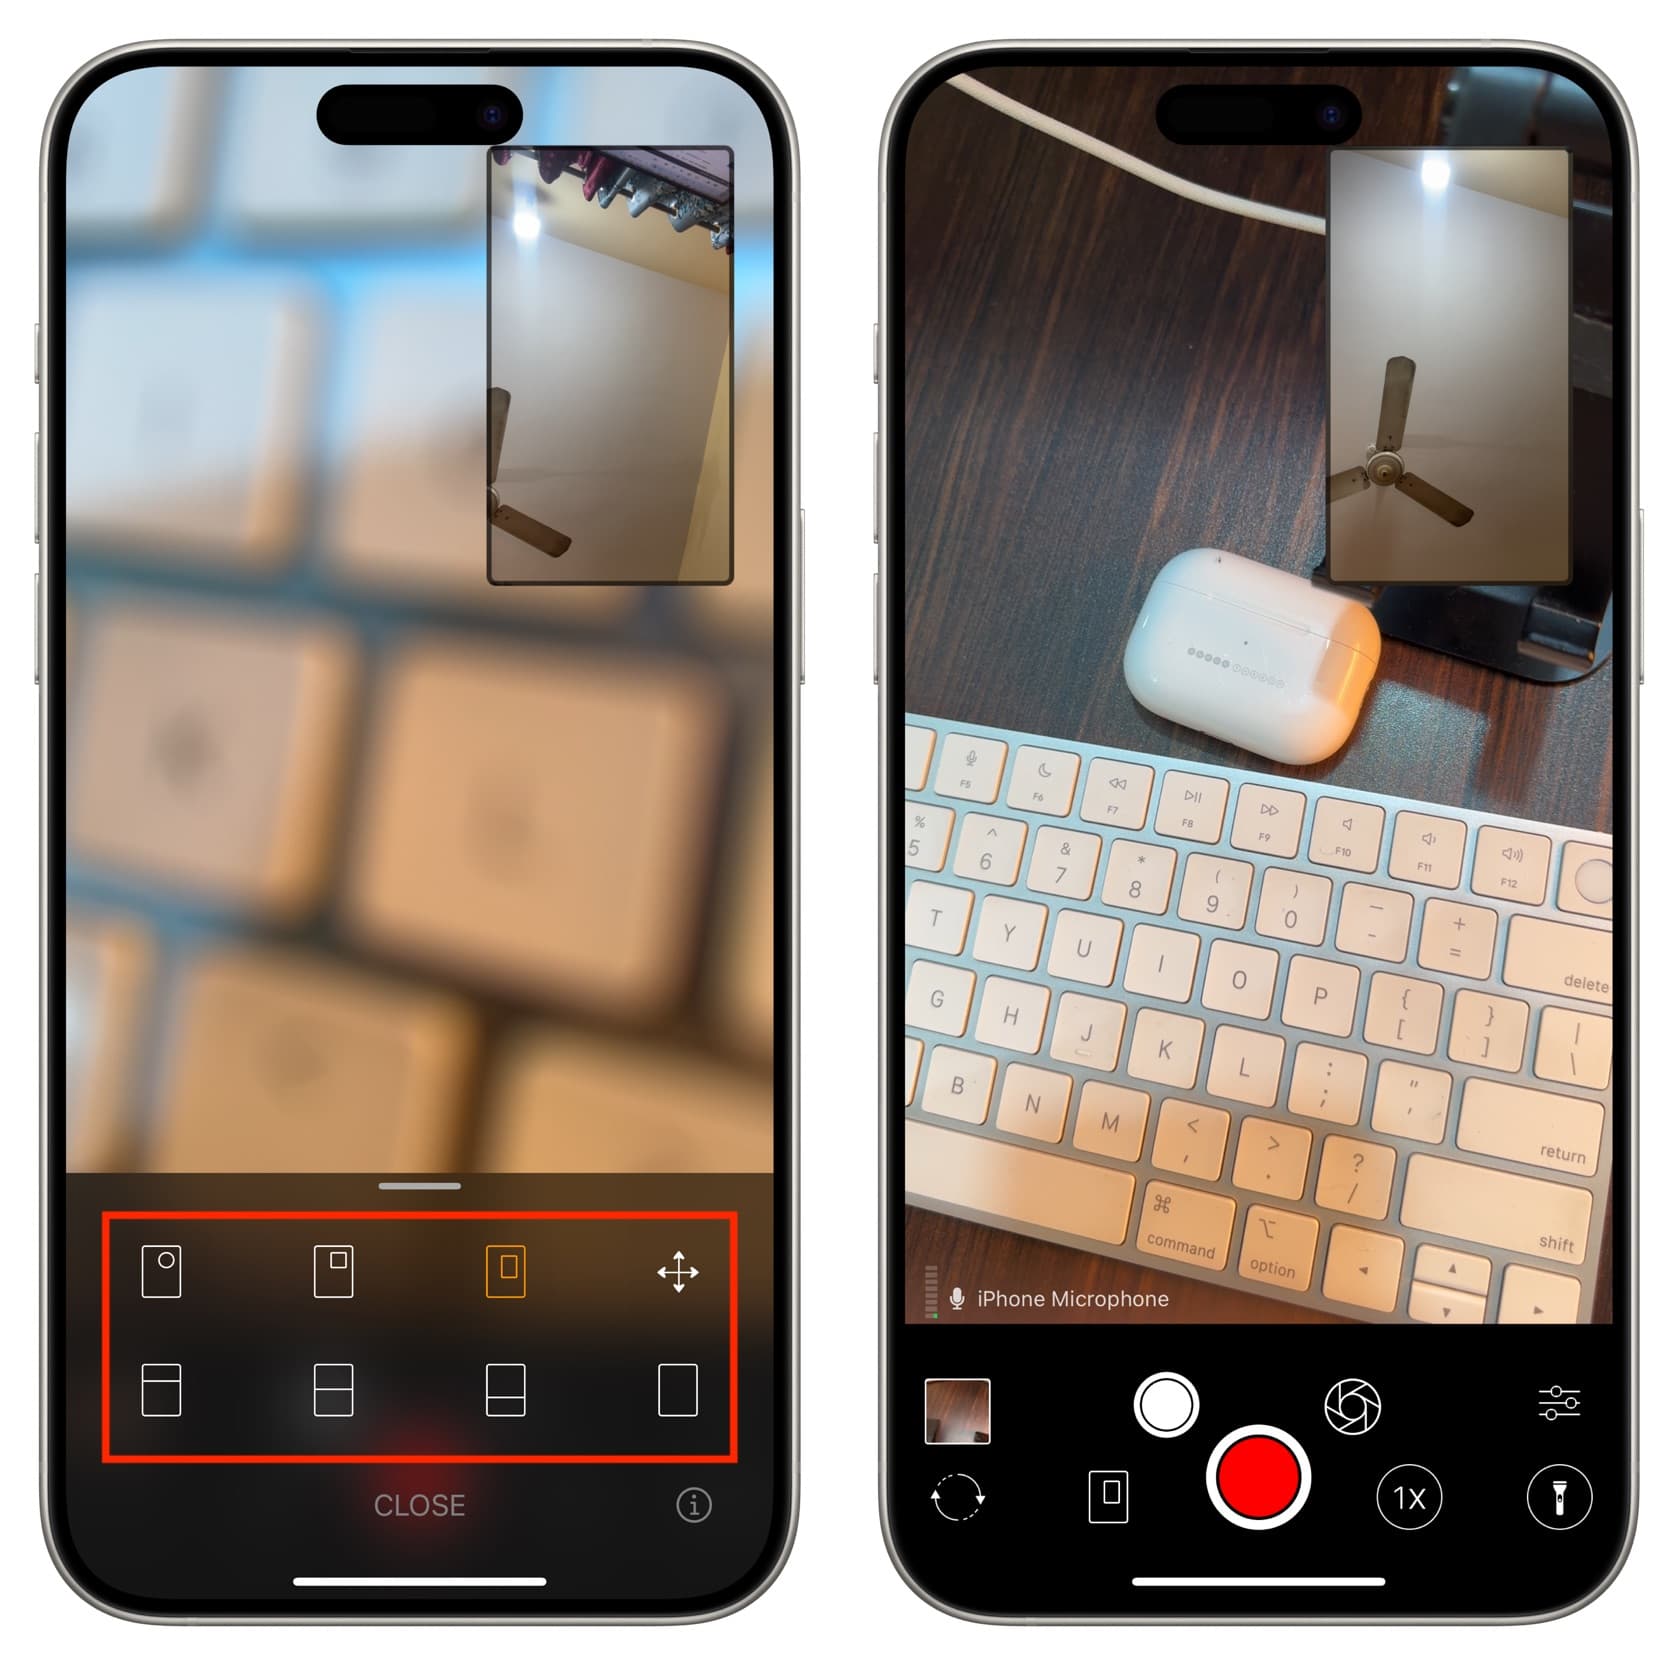 iOS Dualgram app to record with both front and back cameras at the same time